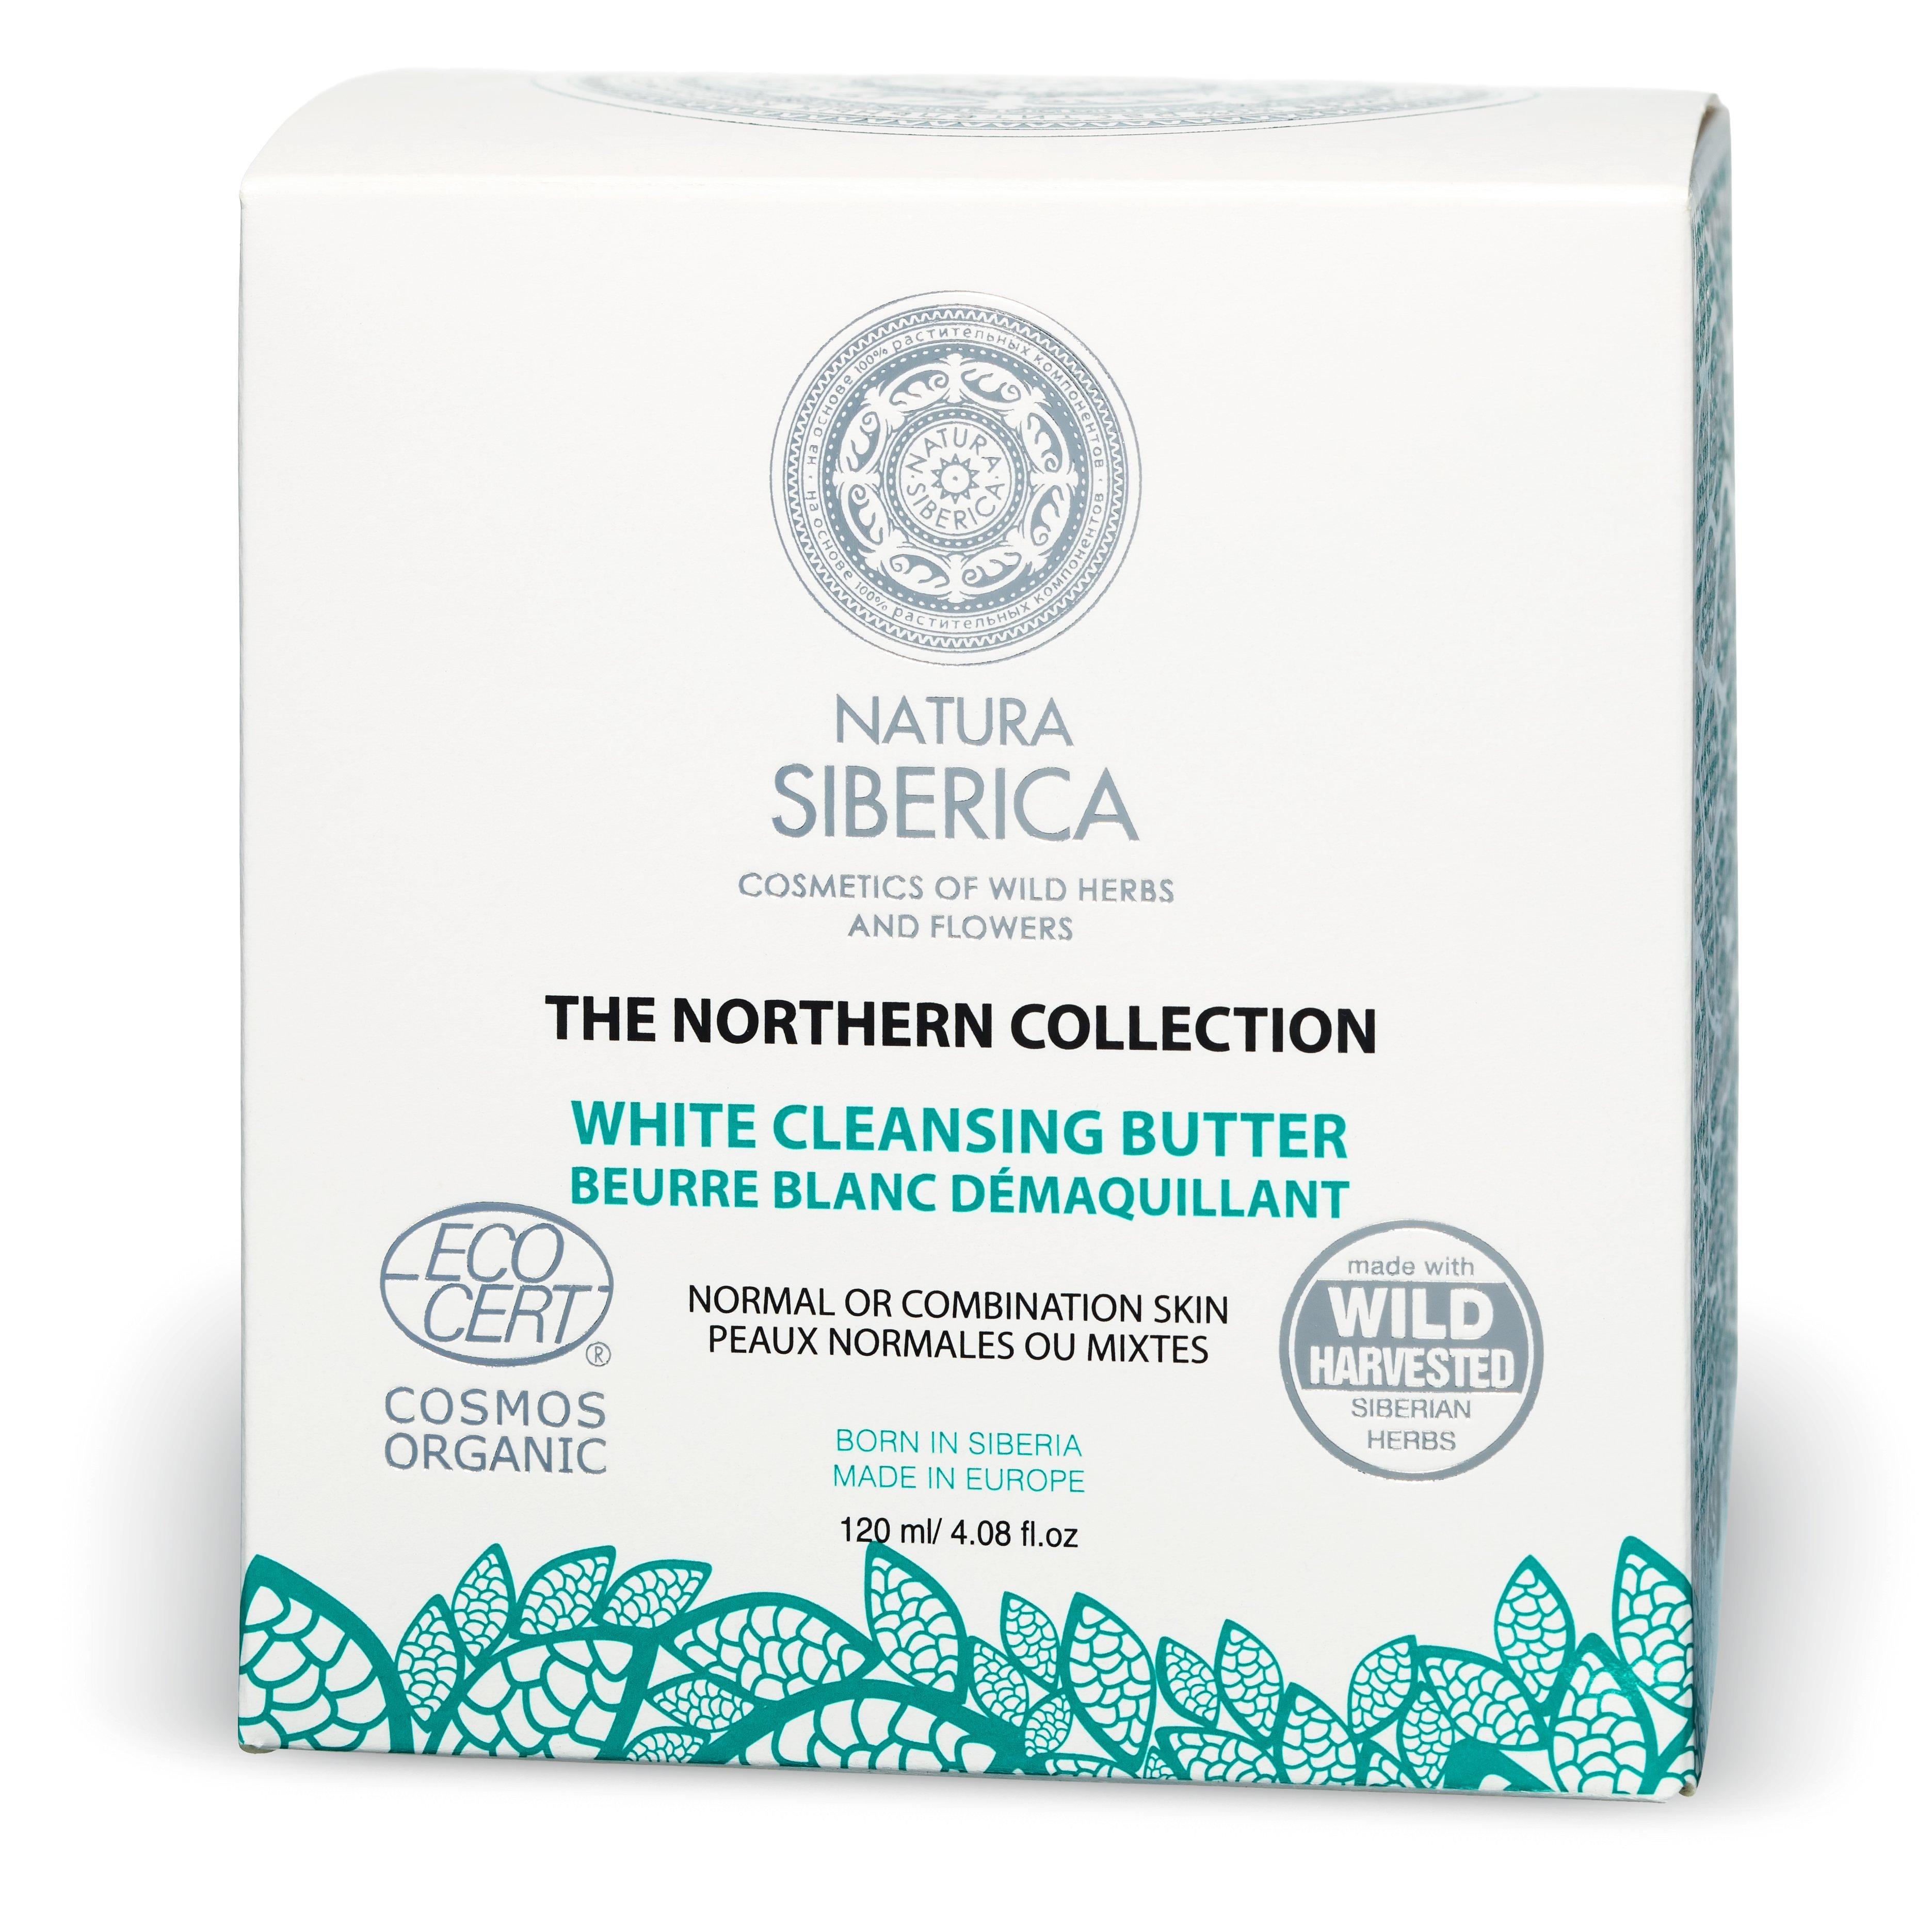 NATURA SIBERICA WHITE CLEANSING BUTTER White Cleansing Butter | acquistare  online - MANOR